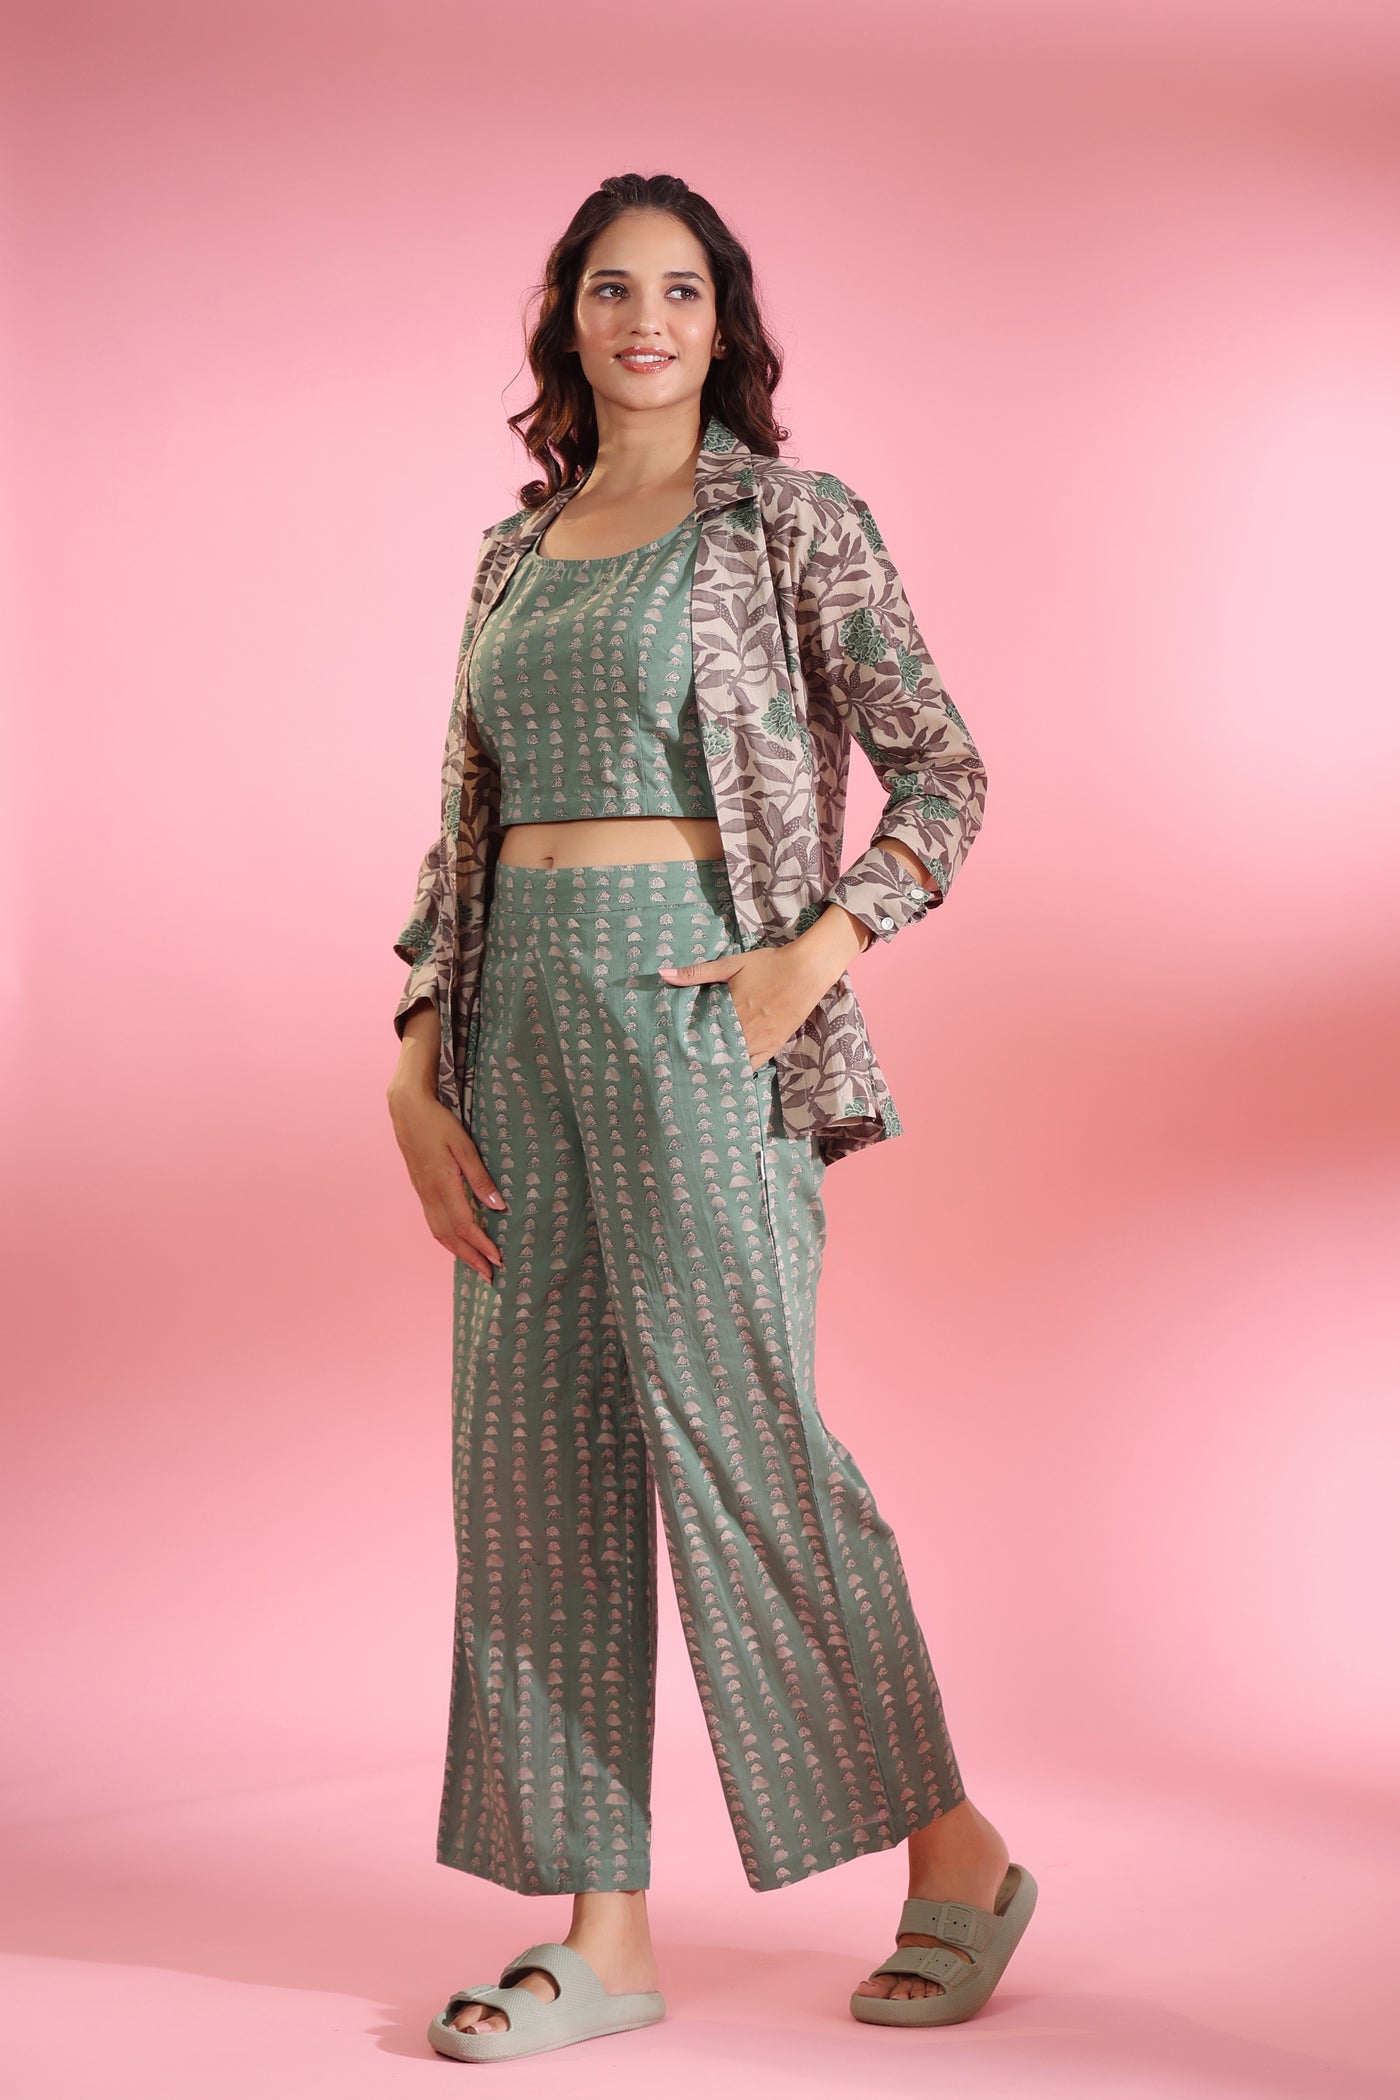 Parallel Lines with Grey Floral Shrug Cotton Three piece set